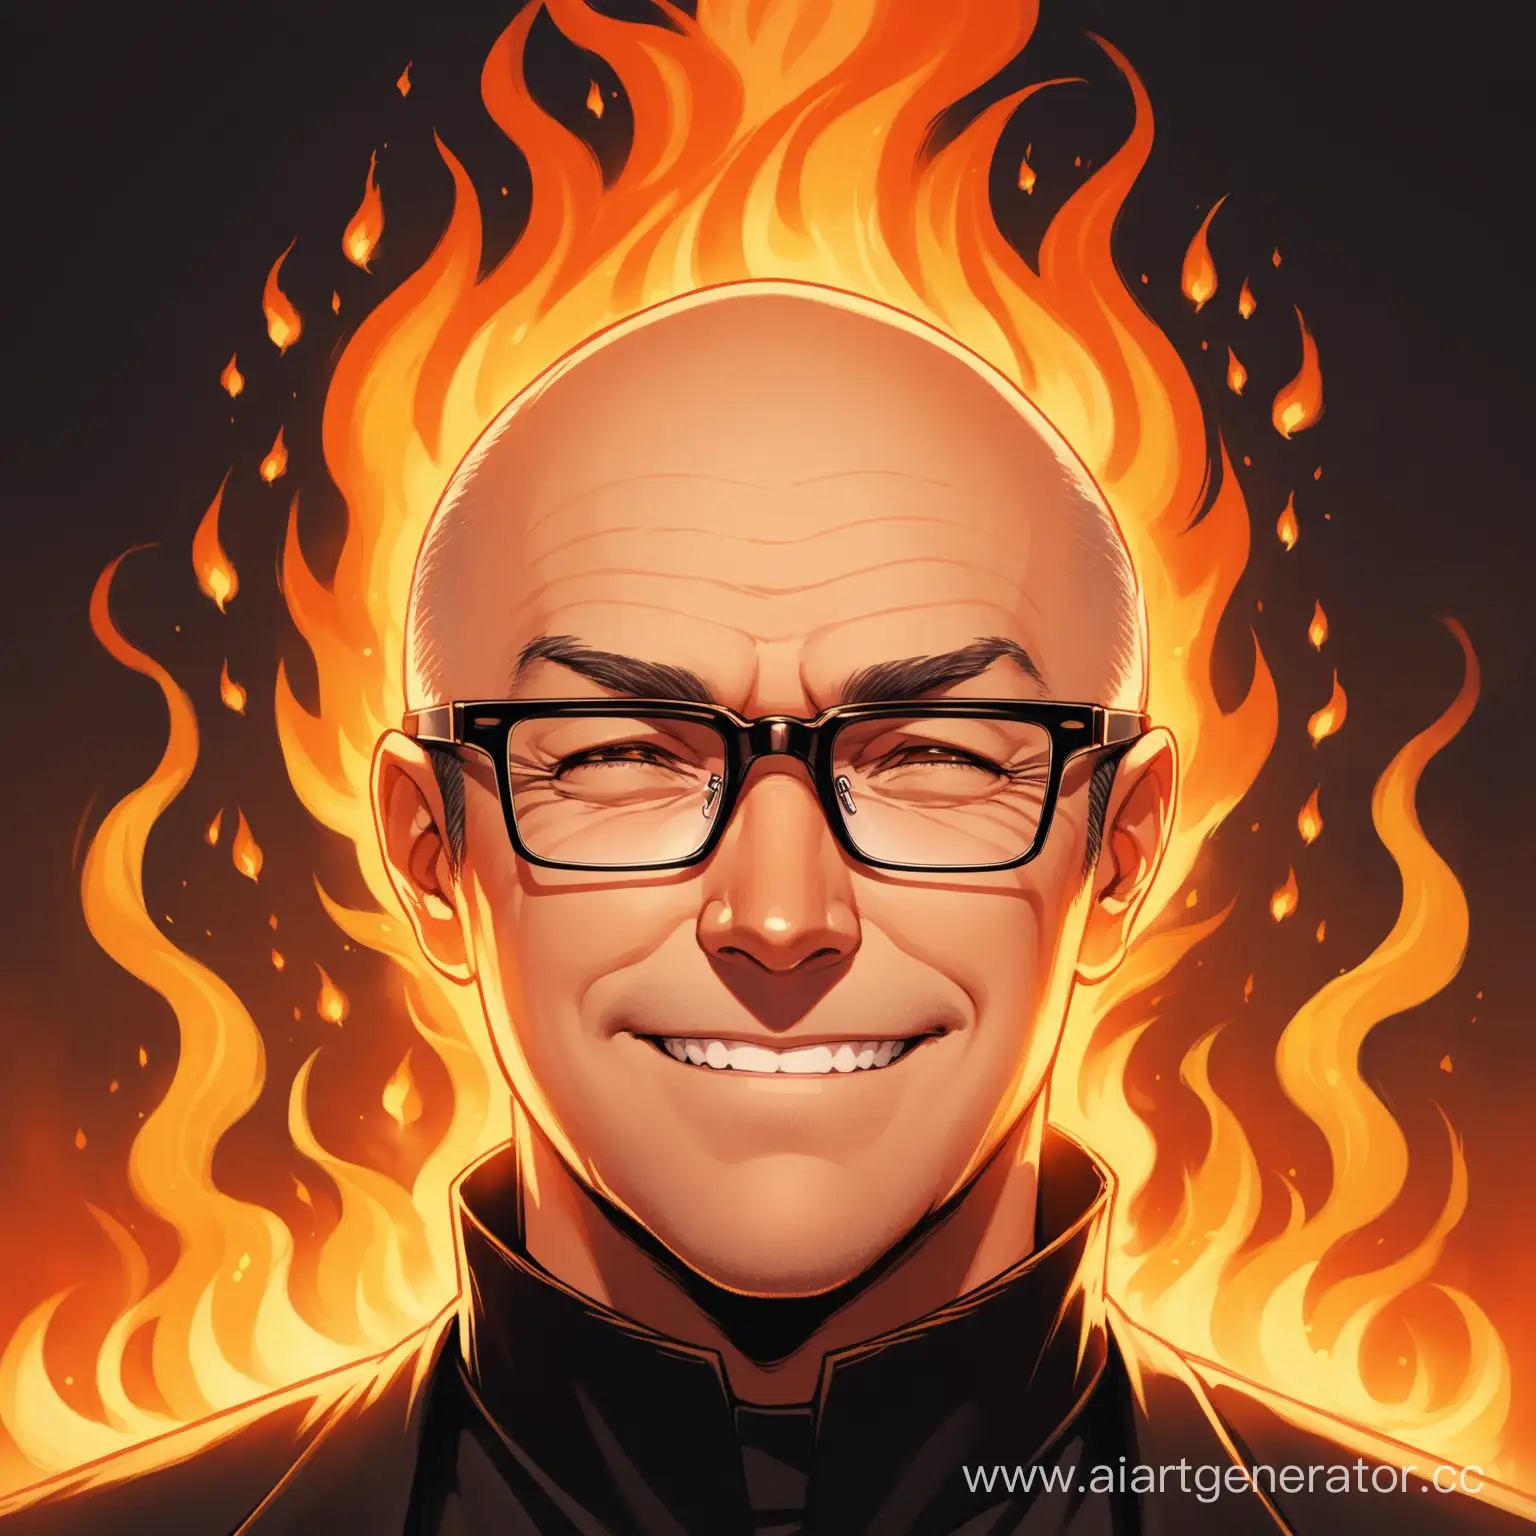 the face of a middle-aged man in rectangular glasses with black frames, a slight grin in the corner of his closed mouth, and instead of hair there are tongues of flame